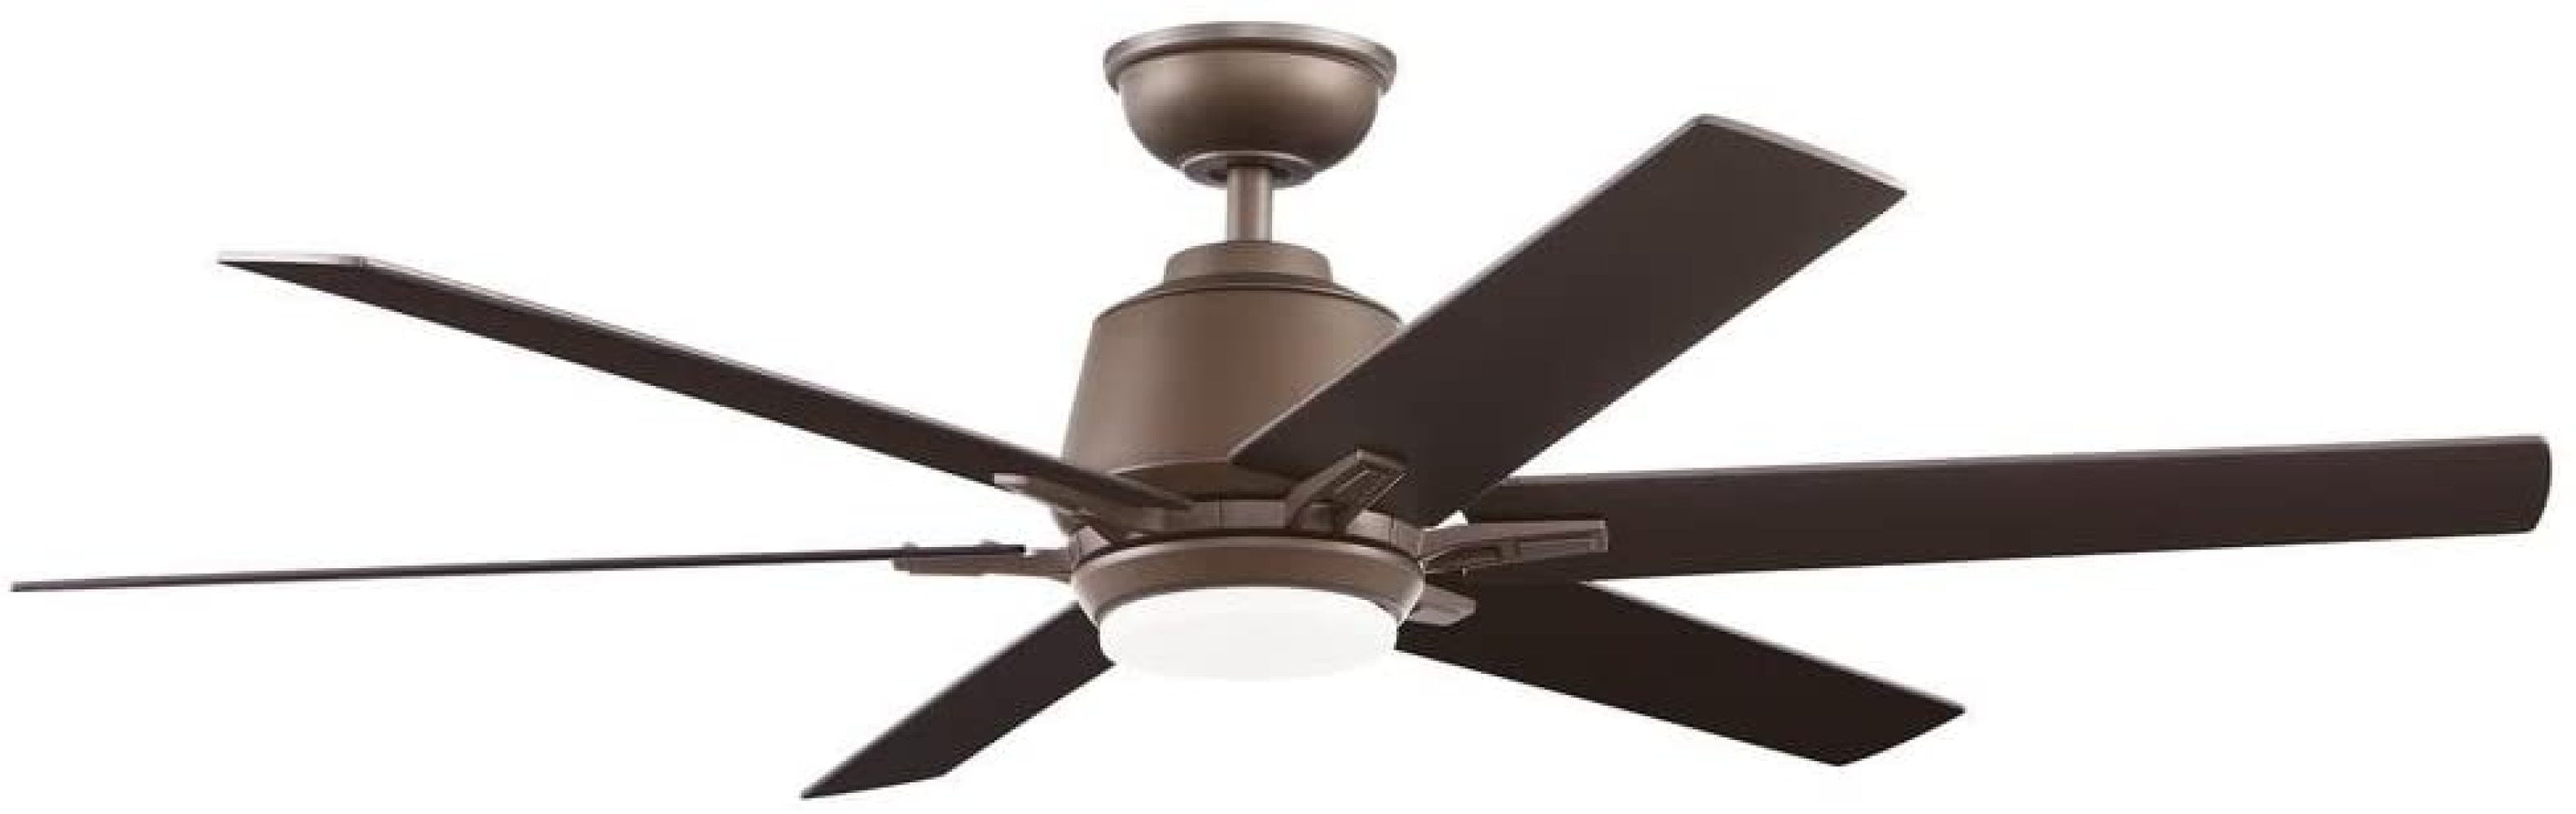 Kensgrove 54 in Integrated LED Indoor Espresso Bronze Ceiling Fan with Light Kt 